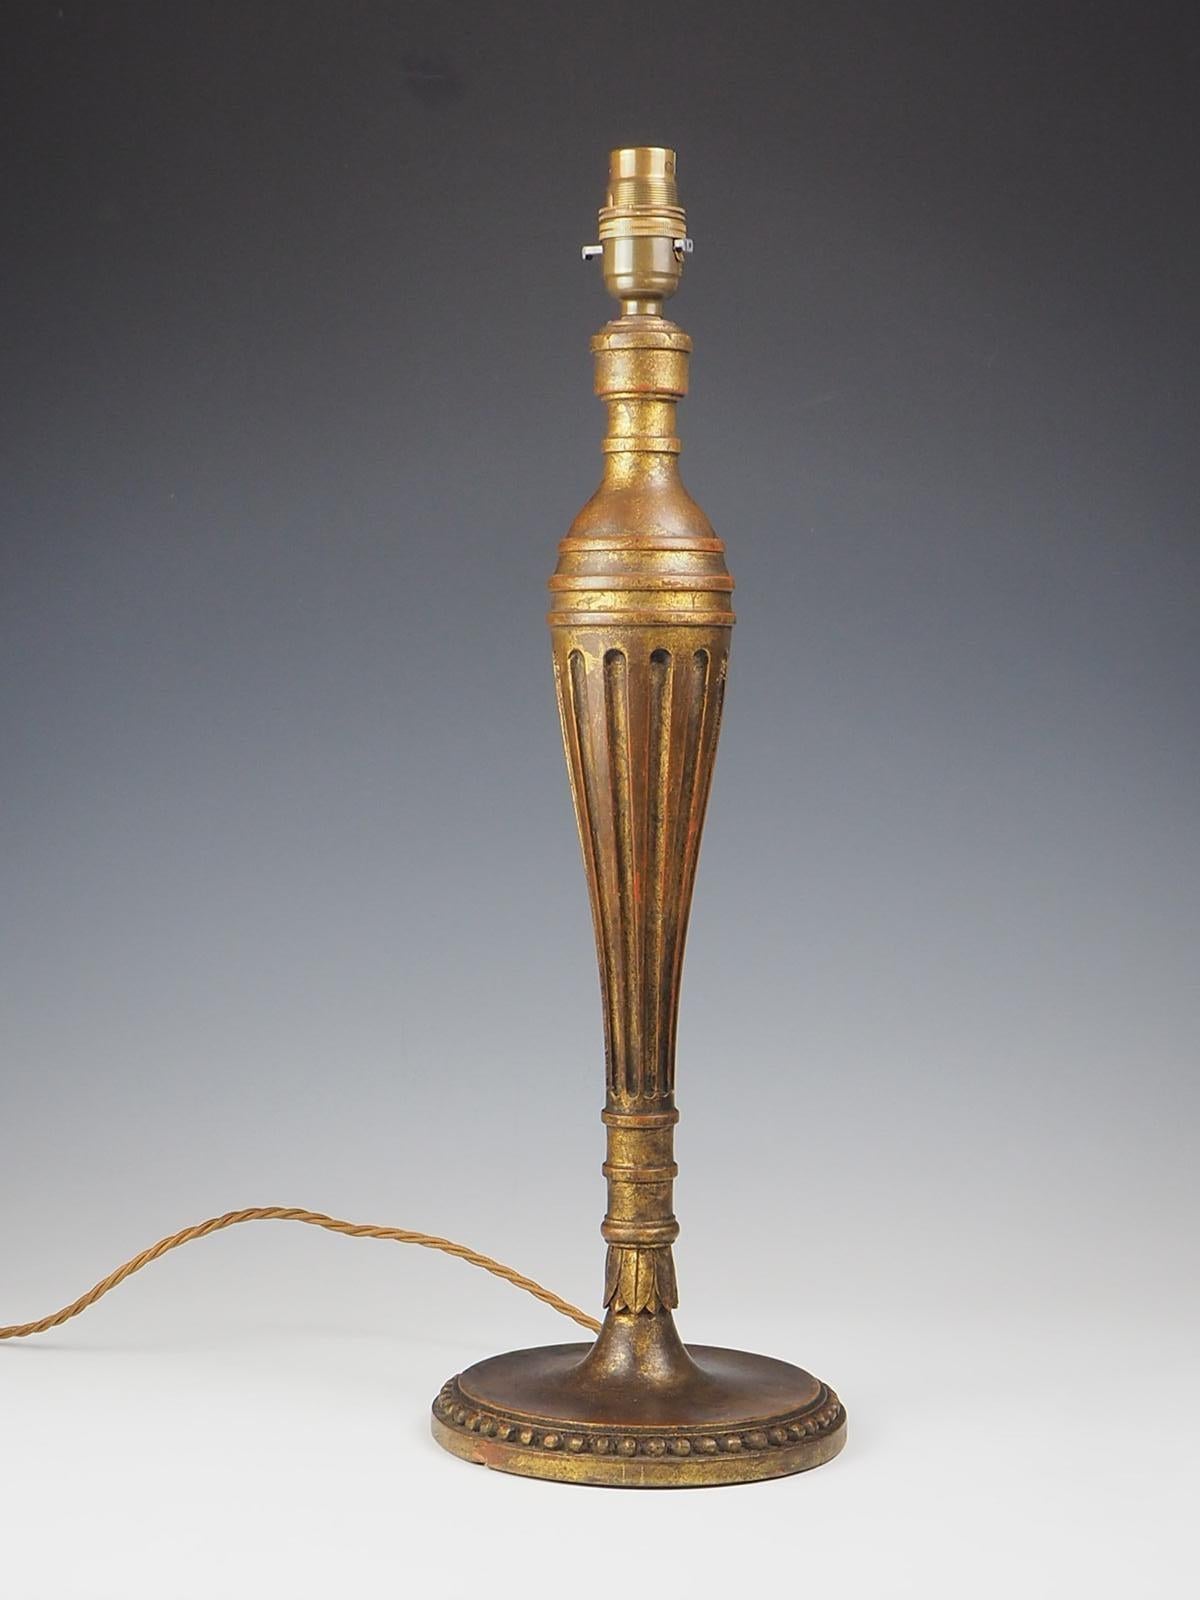 19th Century Carved Polychrome Giltwood Table Lamp, a truly exquisite piece that exudes elegance and sophistication. Crafted with meticulous attention to detail, this lamp showcases a stunning carved wood base that has been expertly finished in a